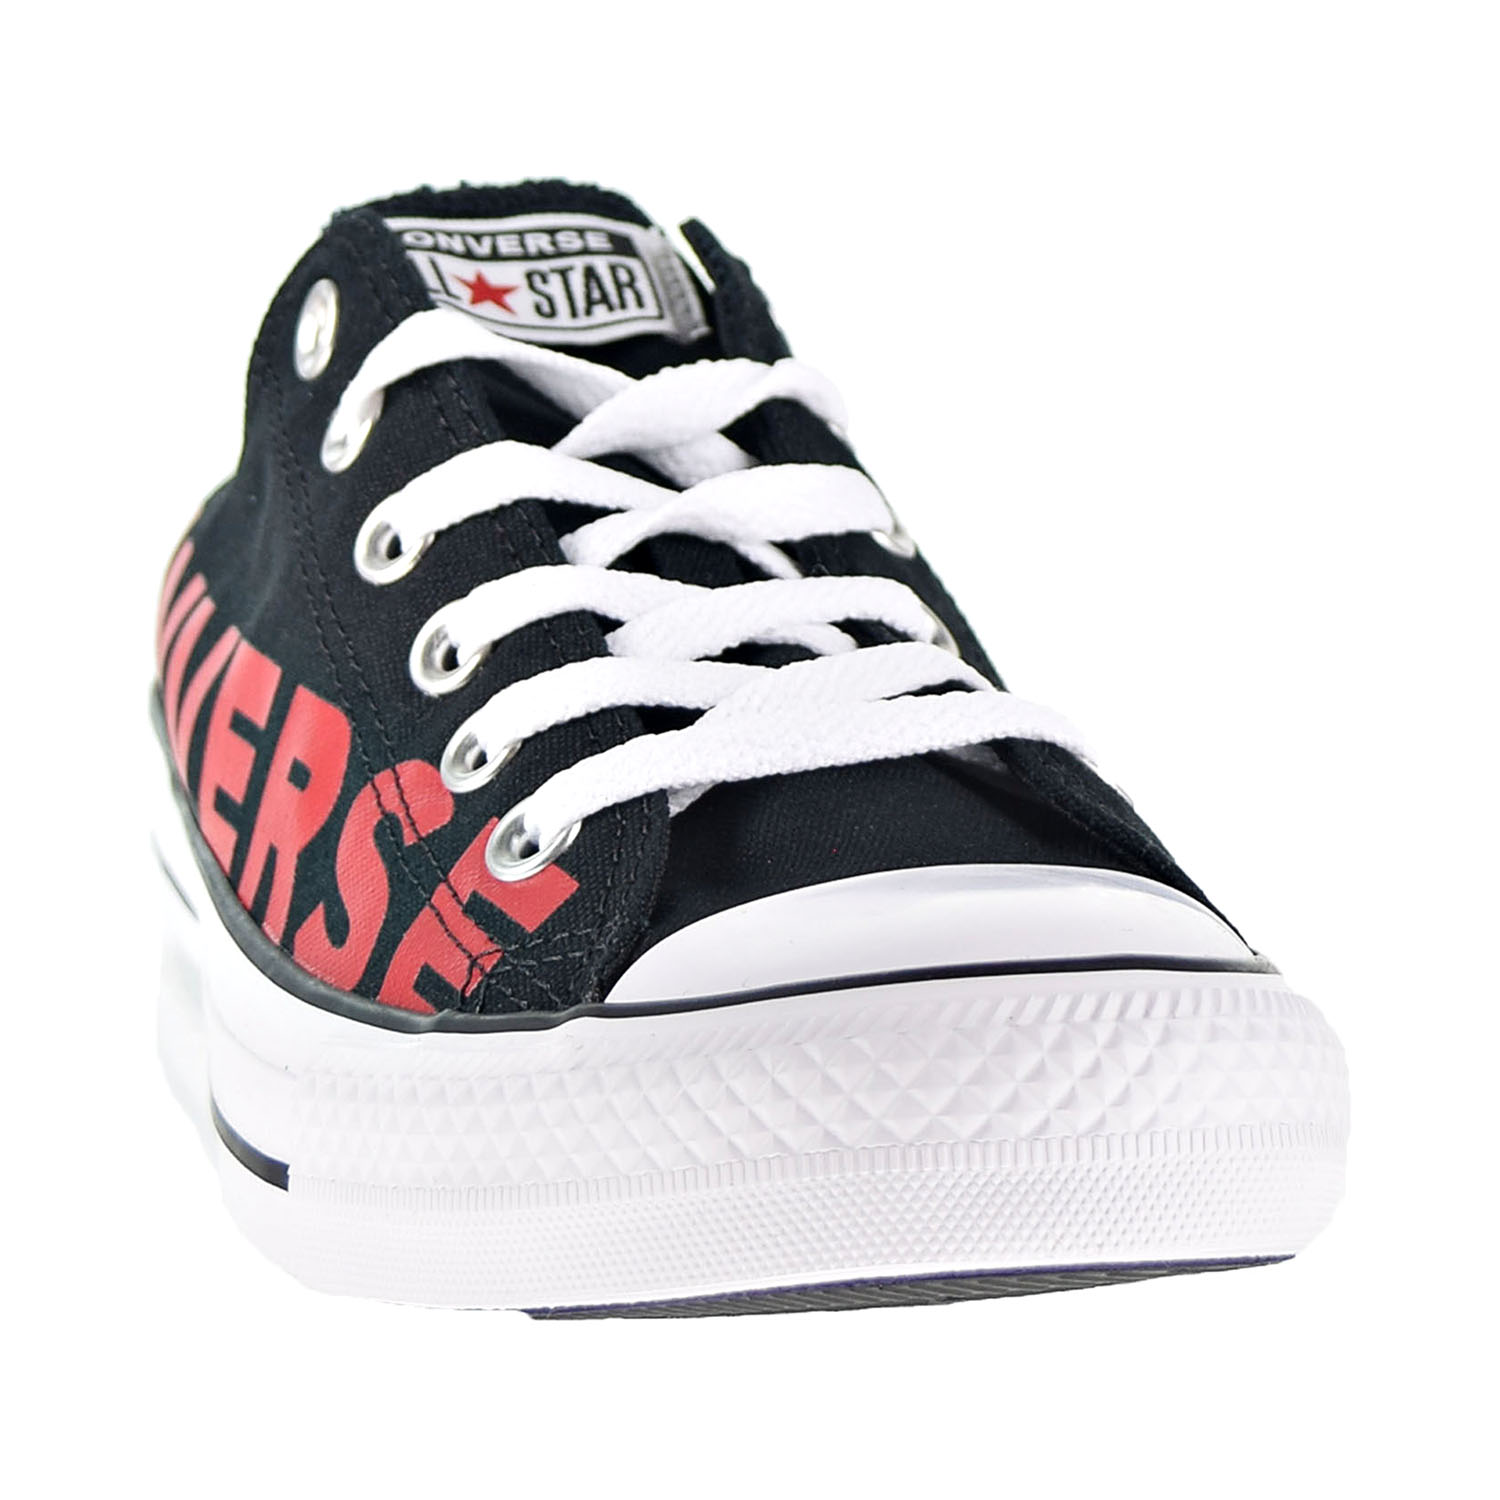 Converse Chuck Taylor All Star Ox Wordmark Men's Shoes Black-Enamel Red-White 165430f - image 2 of 6